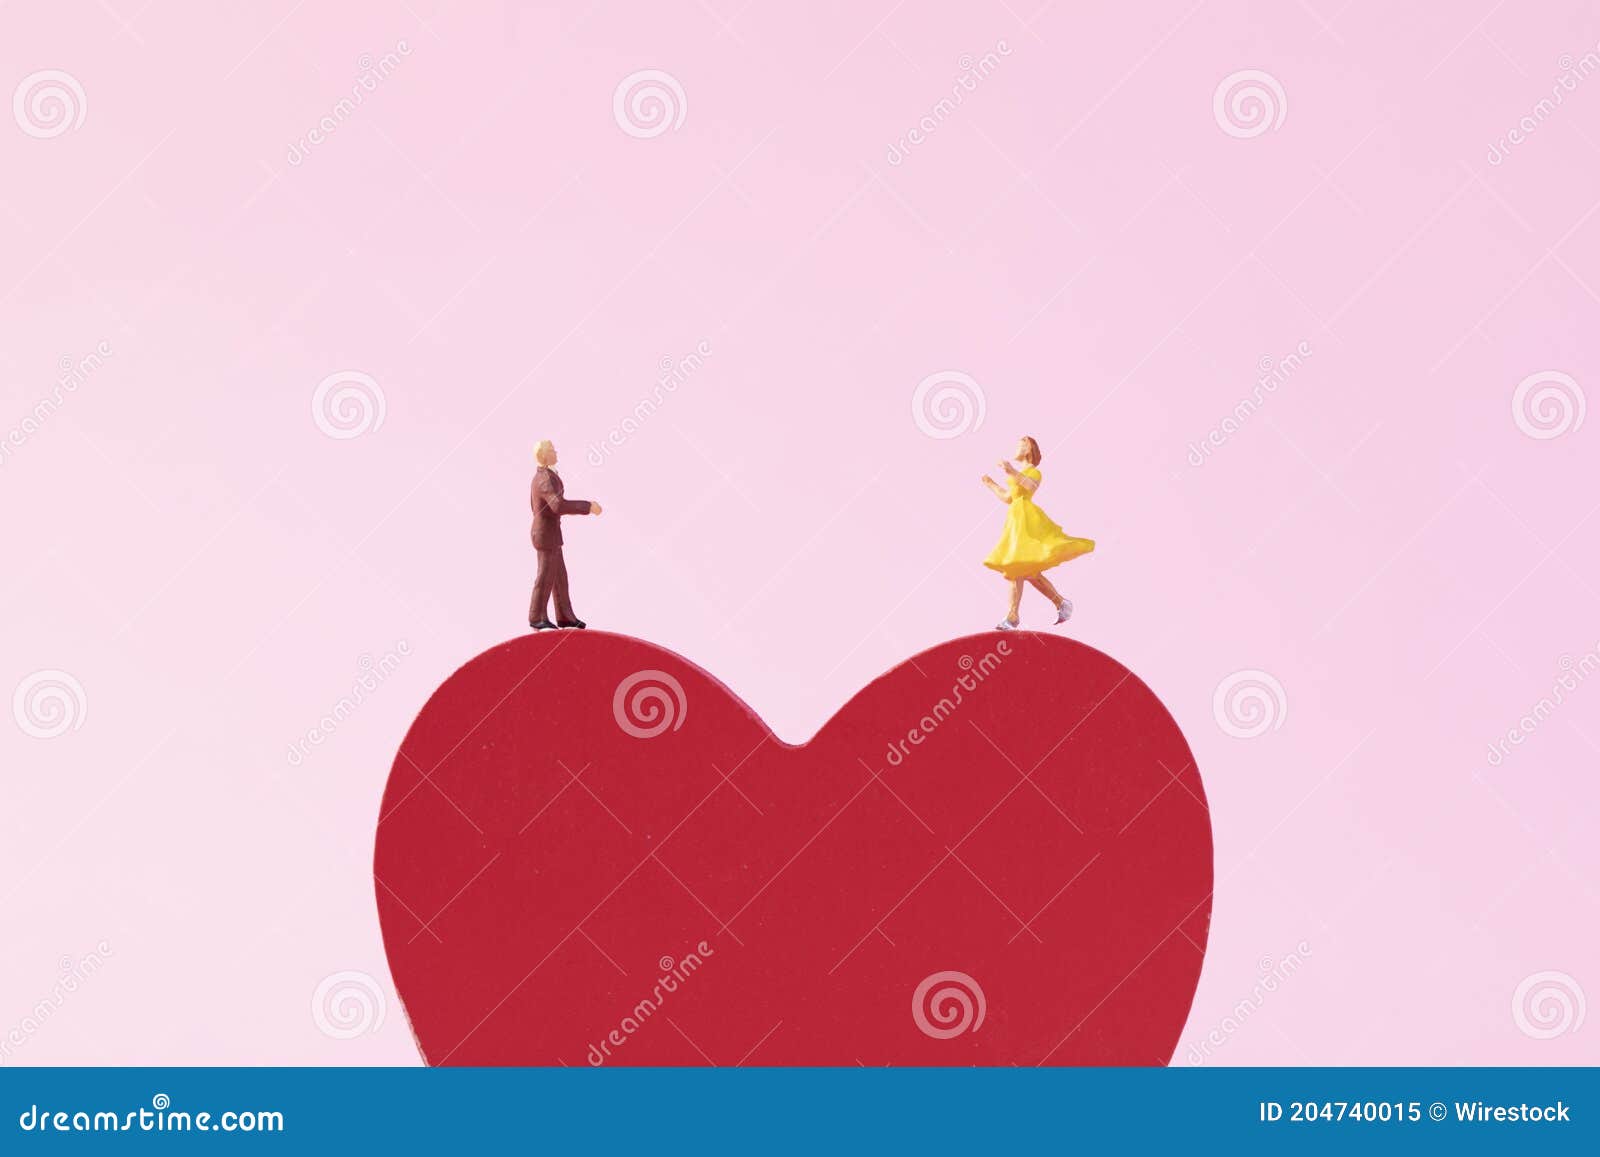 Creative Shot of Valentine S Day Romantic Doll Couple Standing on ...